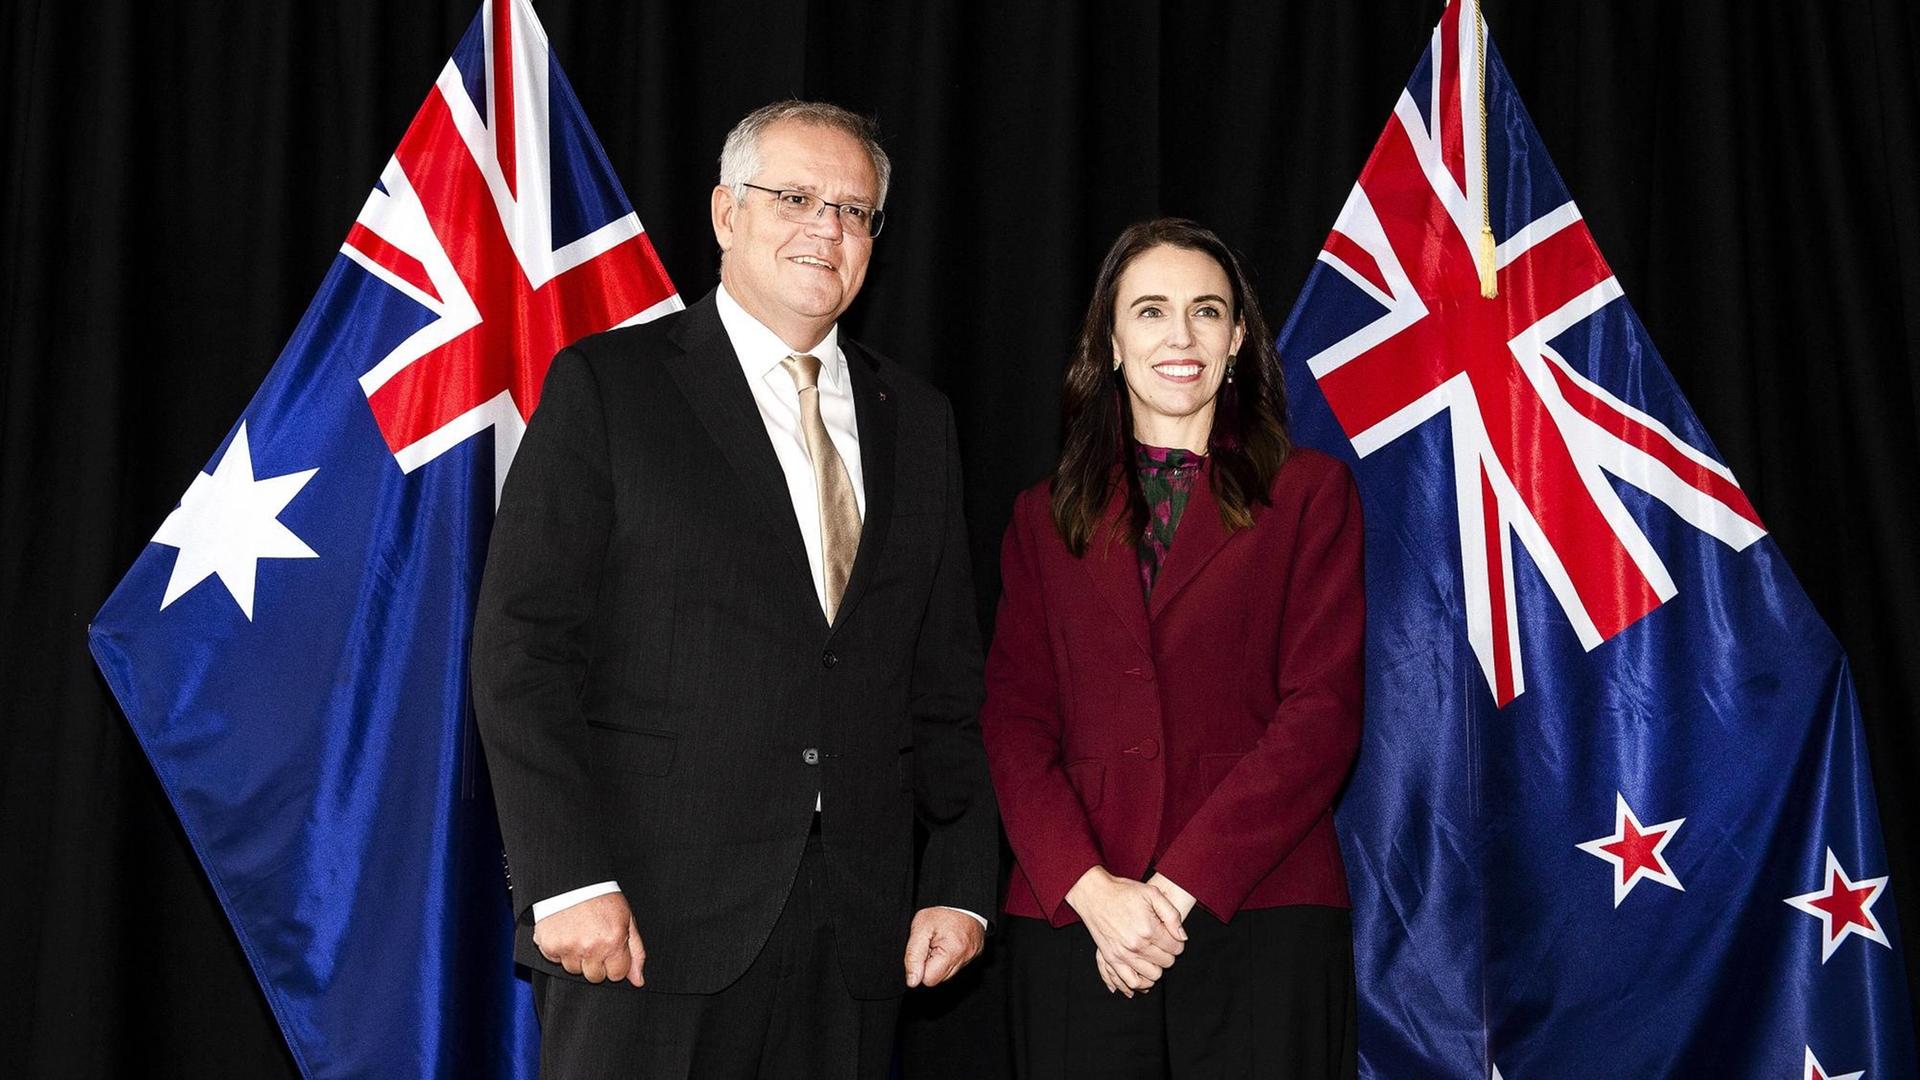 New Zealand Prime Minister Jacinda Ardern R poses for a photo with Australian Prime Minister Scott Morrison ahead of their annual talks on Monday, May 31, 2021 in Queenstown, New Zealand. Australian Prime Minister Scott Morrison is on a two-day visit to New Zealand to attend the annual Australia-New Zealand Leaders Meeting. The trip is Scott Morrison s first overseas visit in 2021. AAP Image/Pool, Joe Allison NO ARCHIVING Queenstown Otago New Zealand *** New Zealand Prime Minister Jacinda Ardern R poses for a photo with Australian Prime Minister Scott Morrison ahead of their annual talks on Monday, May 31, 2021 in Queenstown, New Zealand Australian Prime Minister Scott Morrison is on a two day visit to New Zealand to attend the annua Poolfoto AAPIMAGE ,EDITORIAL USE ONLY